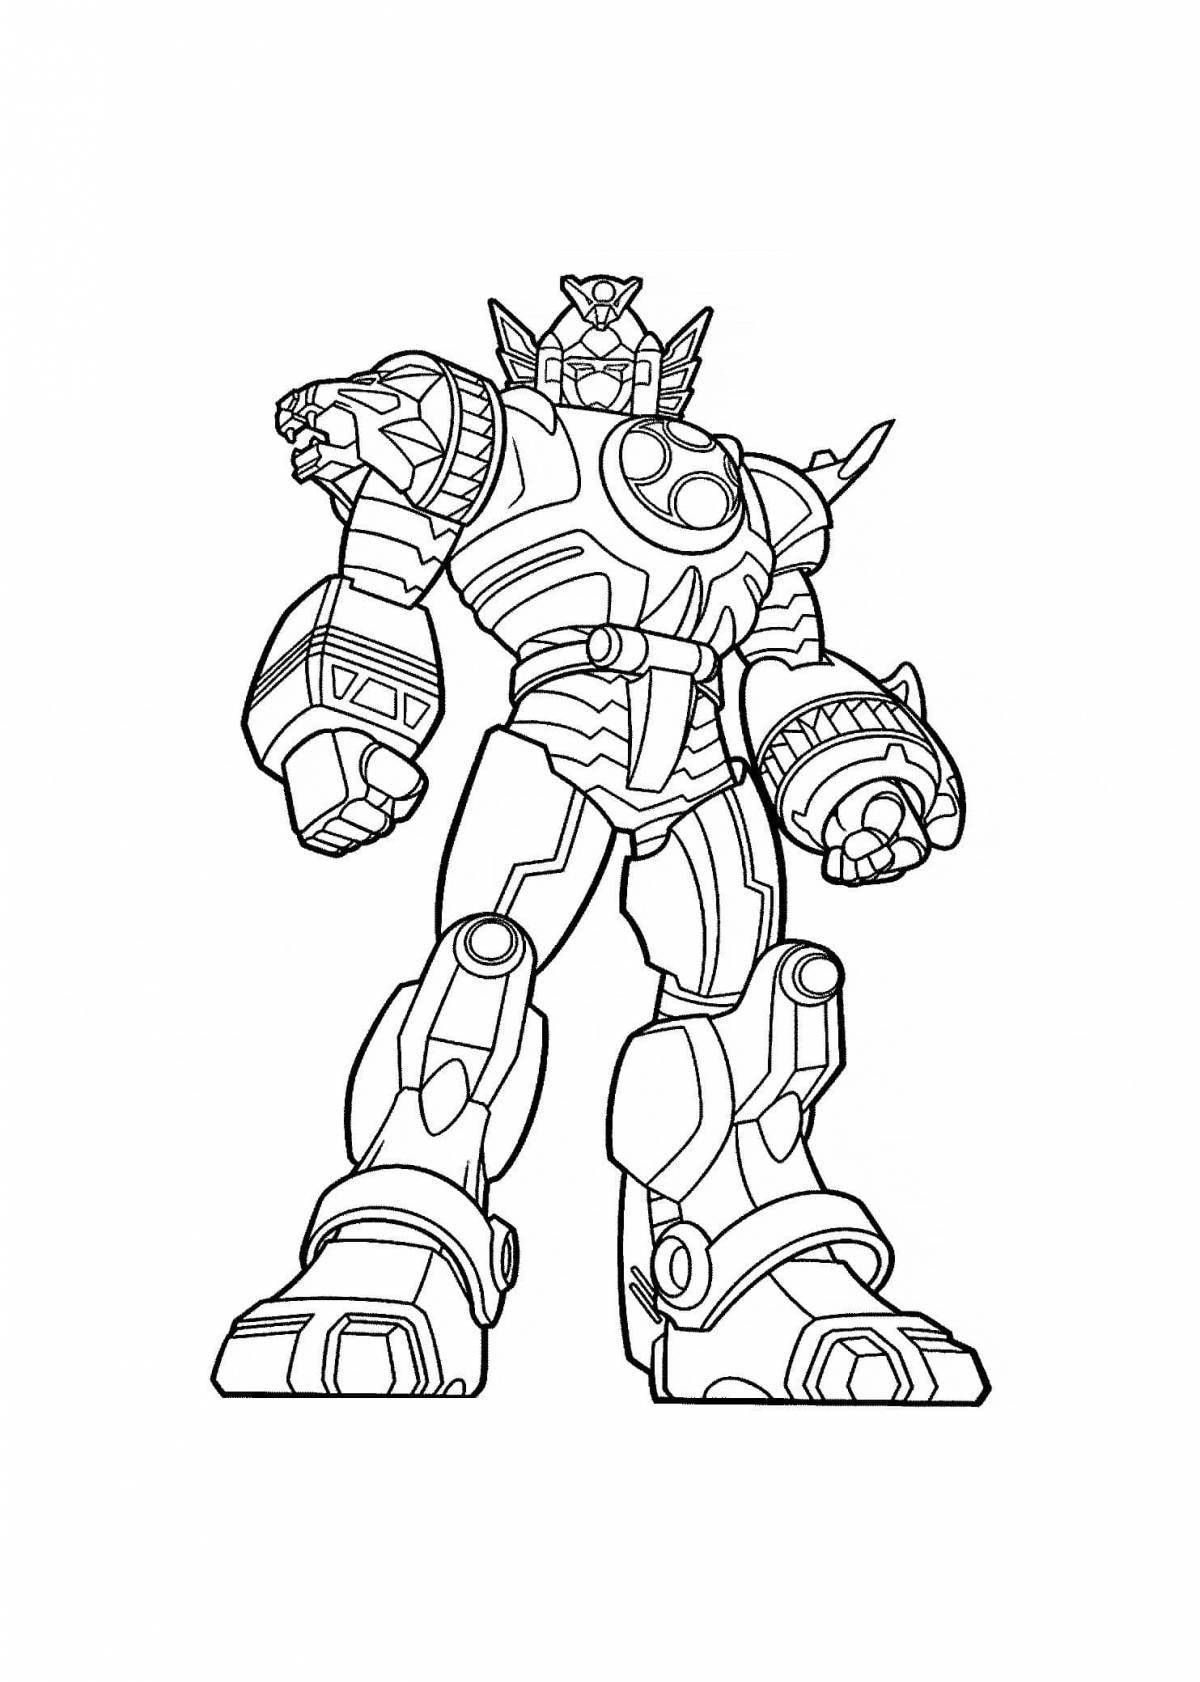 Attractive transformers coloring pages for boys